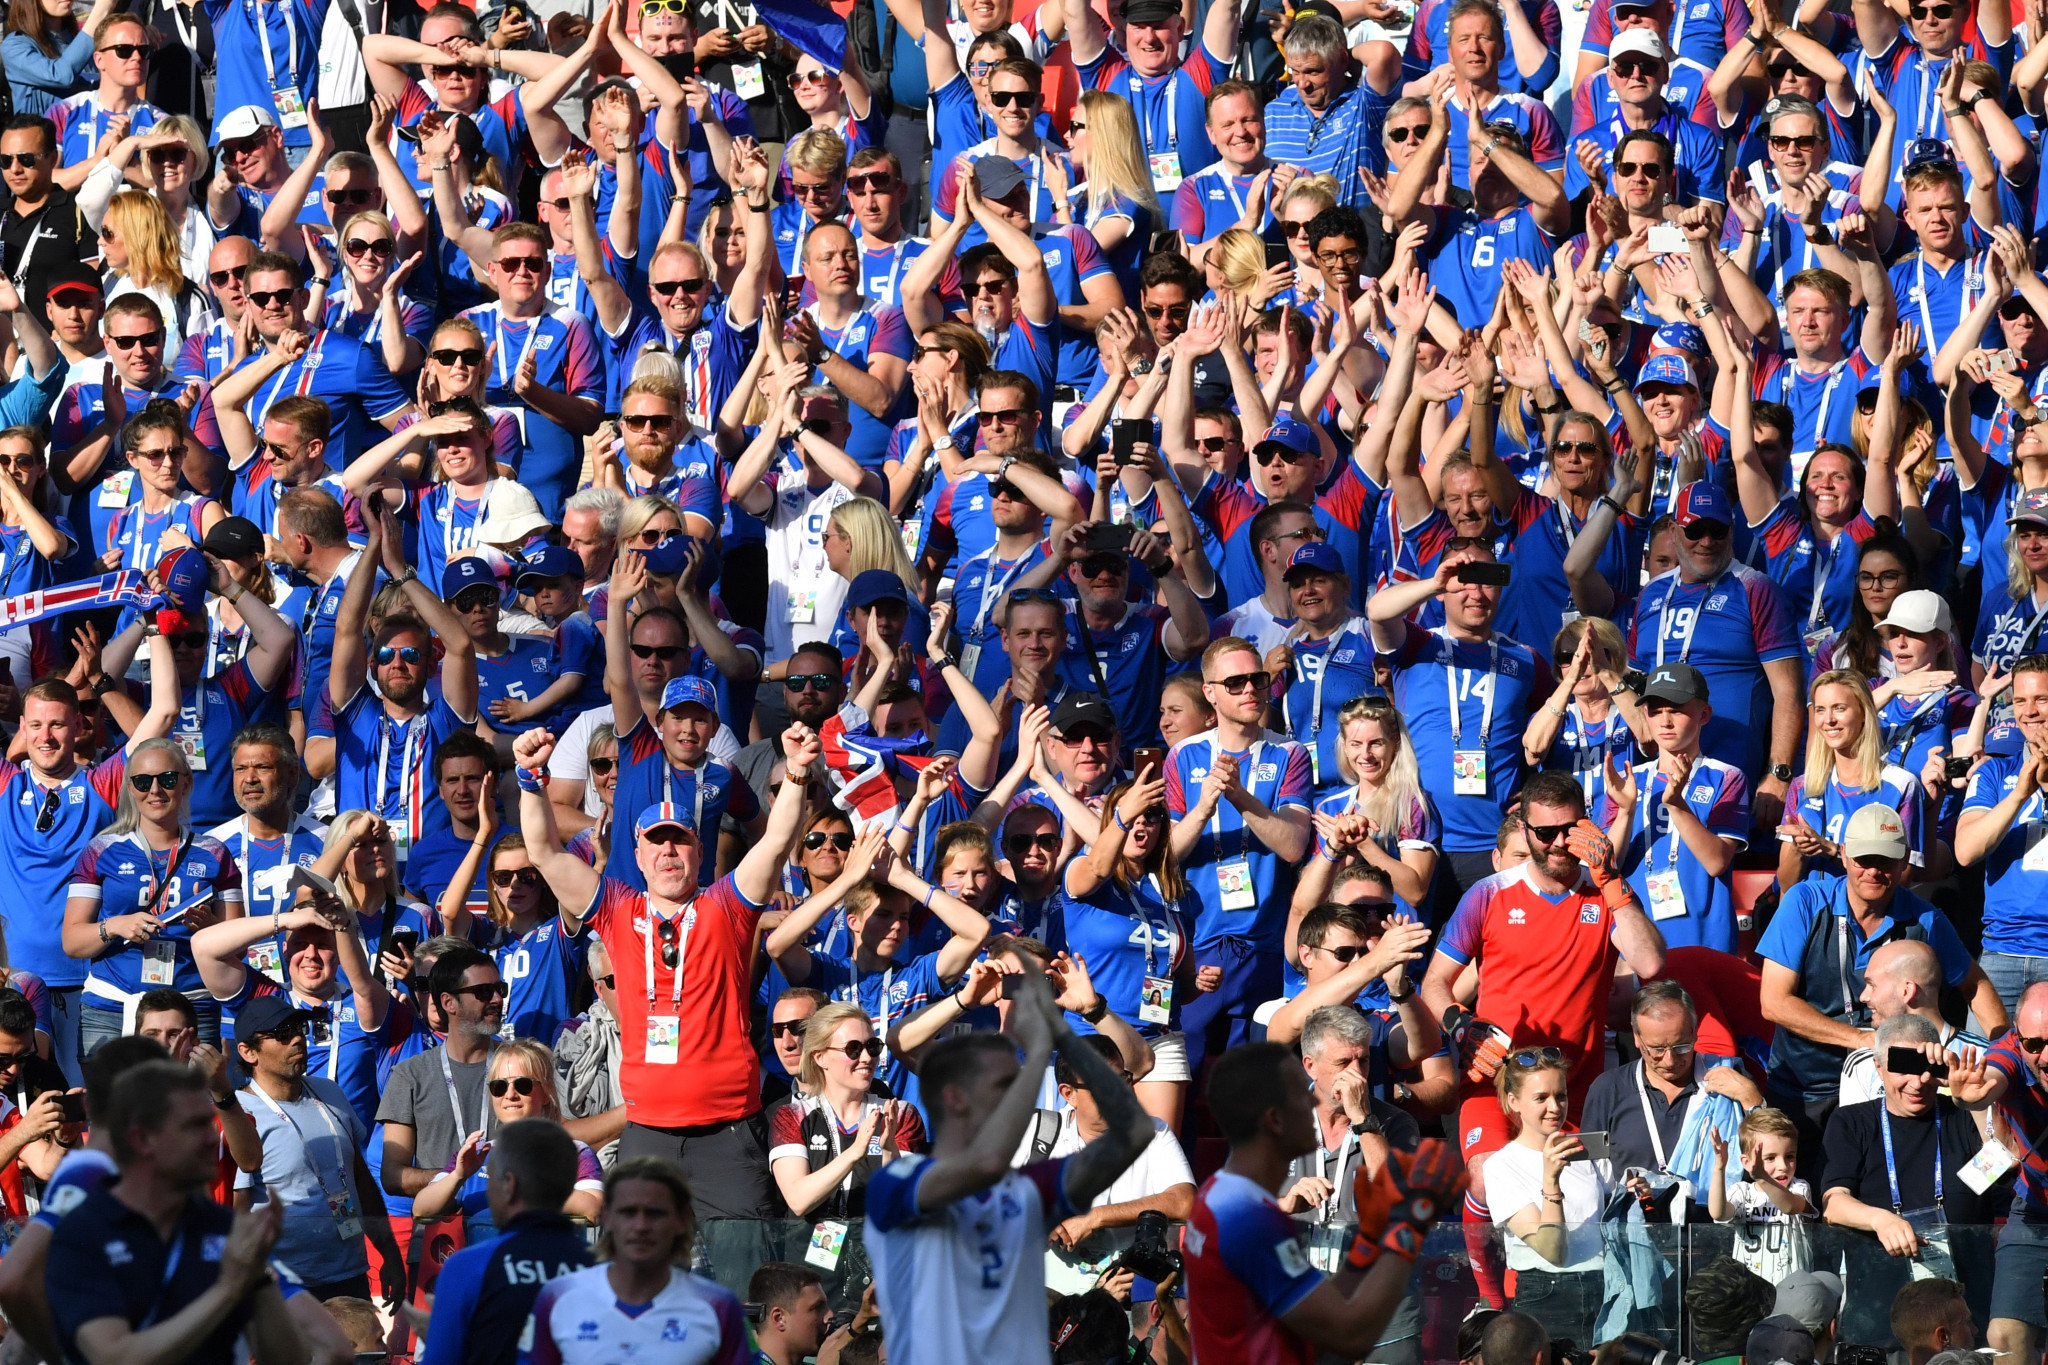 Iceland fans perform their trademark celebration after a surprise draw with Argentina ©Getty Images